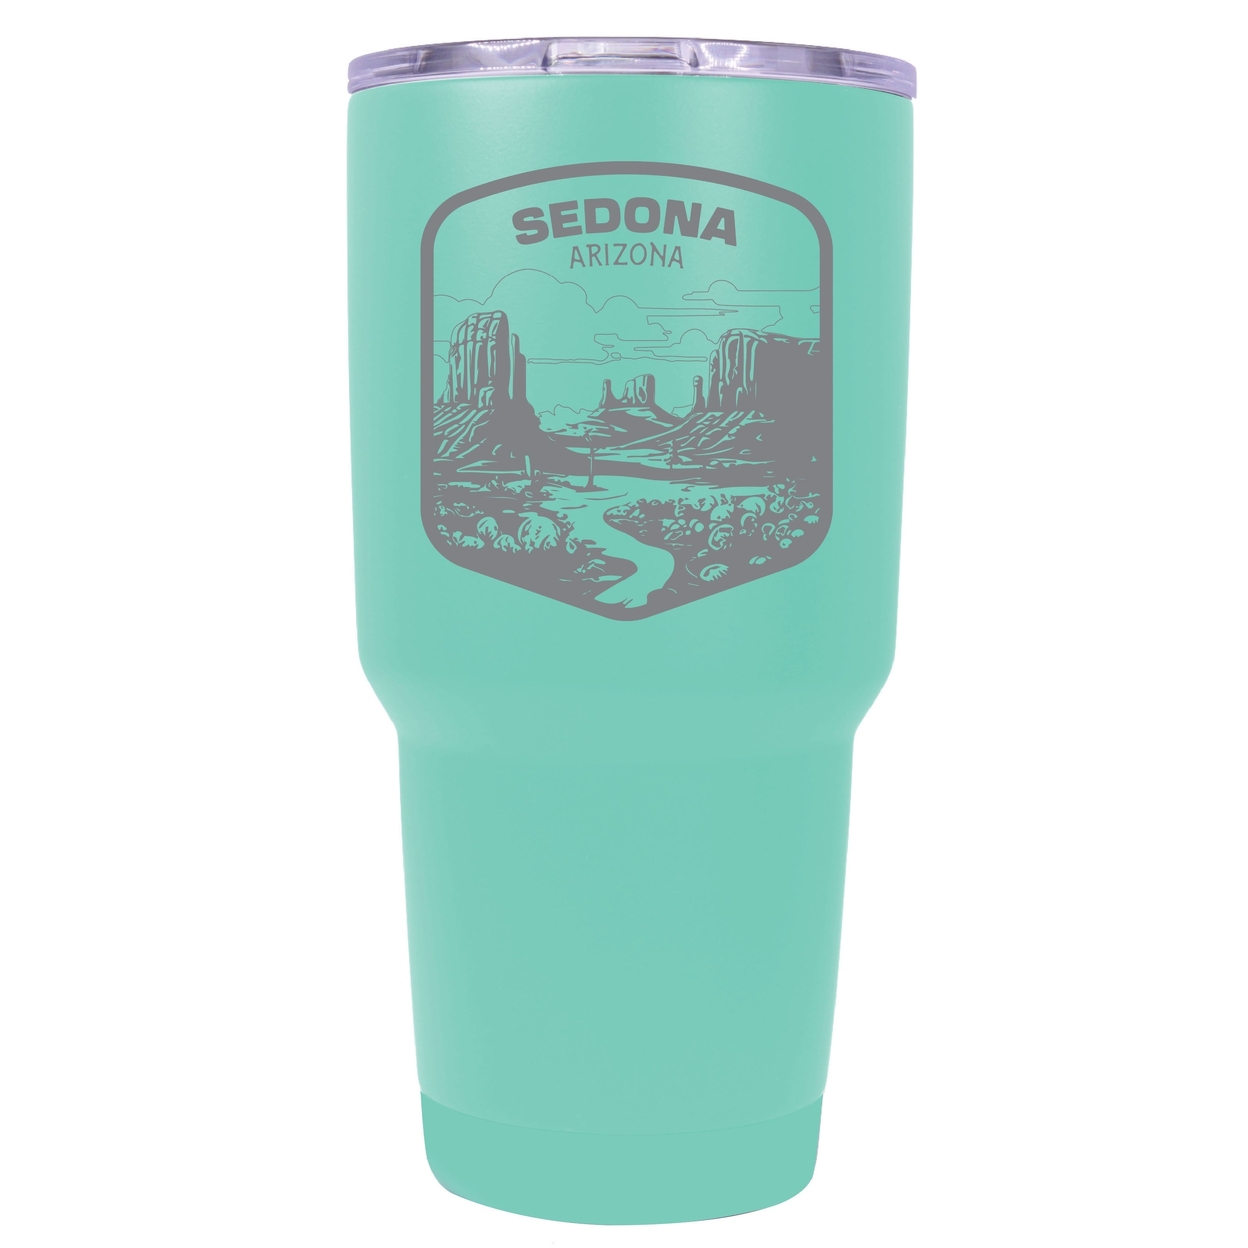 Sedona Arizona Souvenir 24 Oz Engraved Insulated Stainless Steel Tumbler - Red,,2-Pack